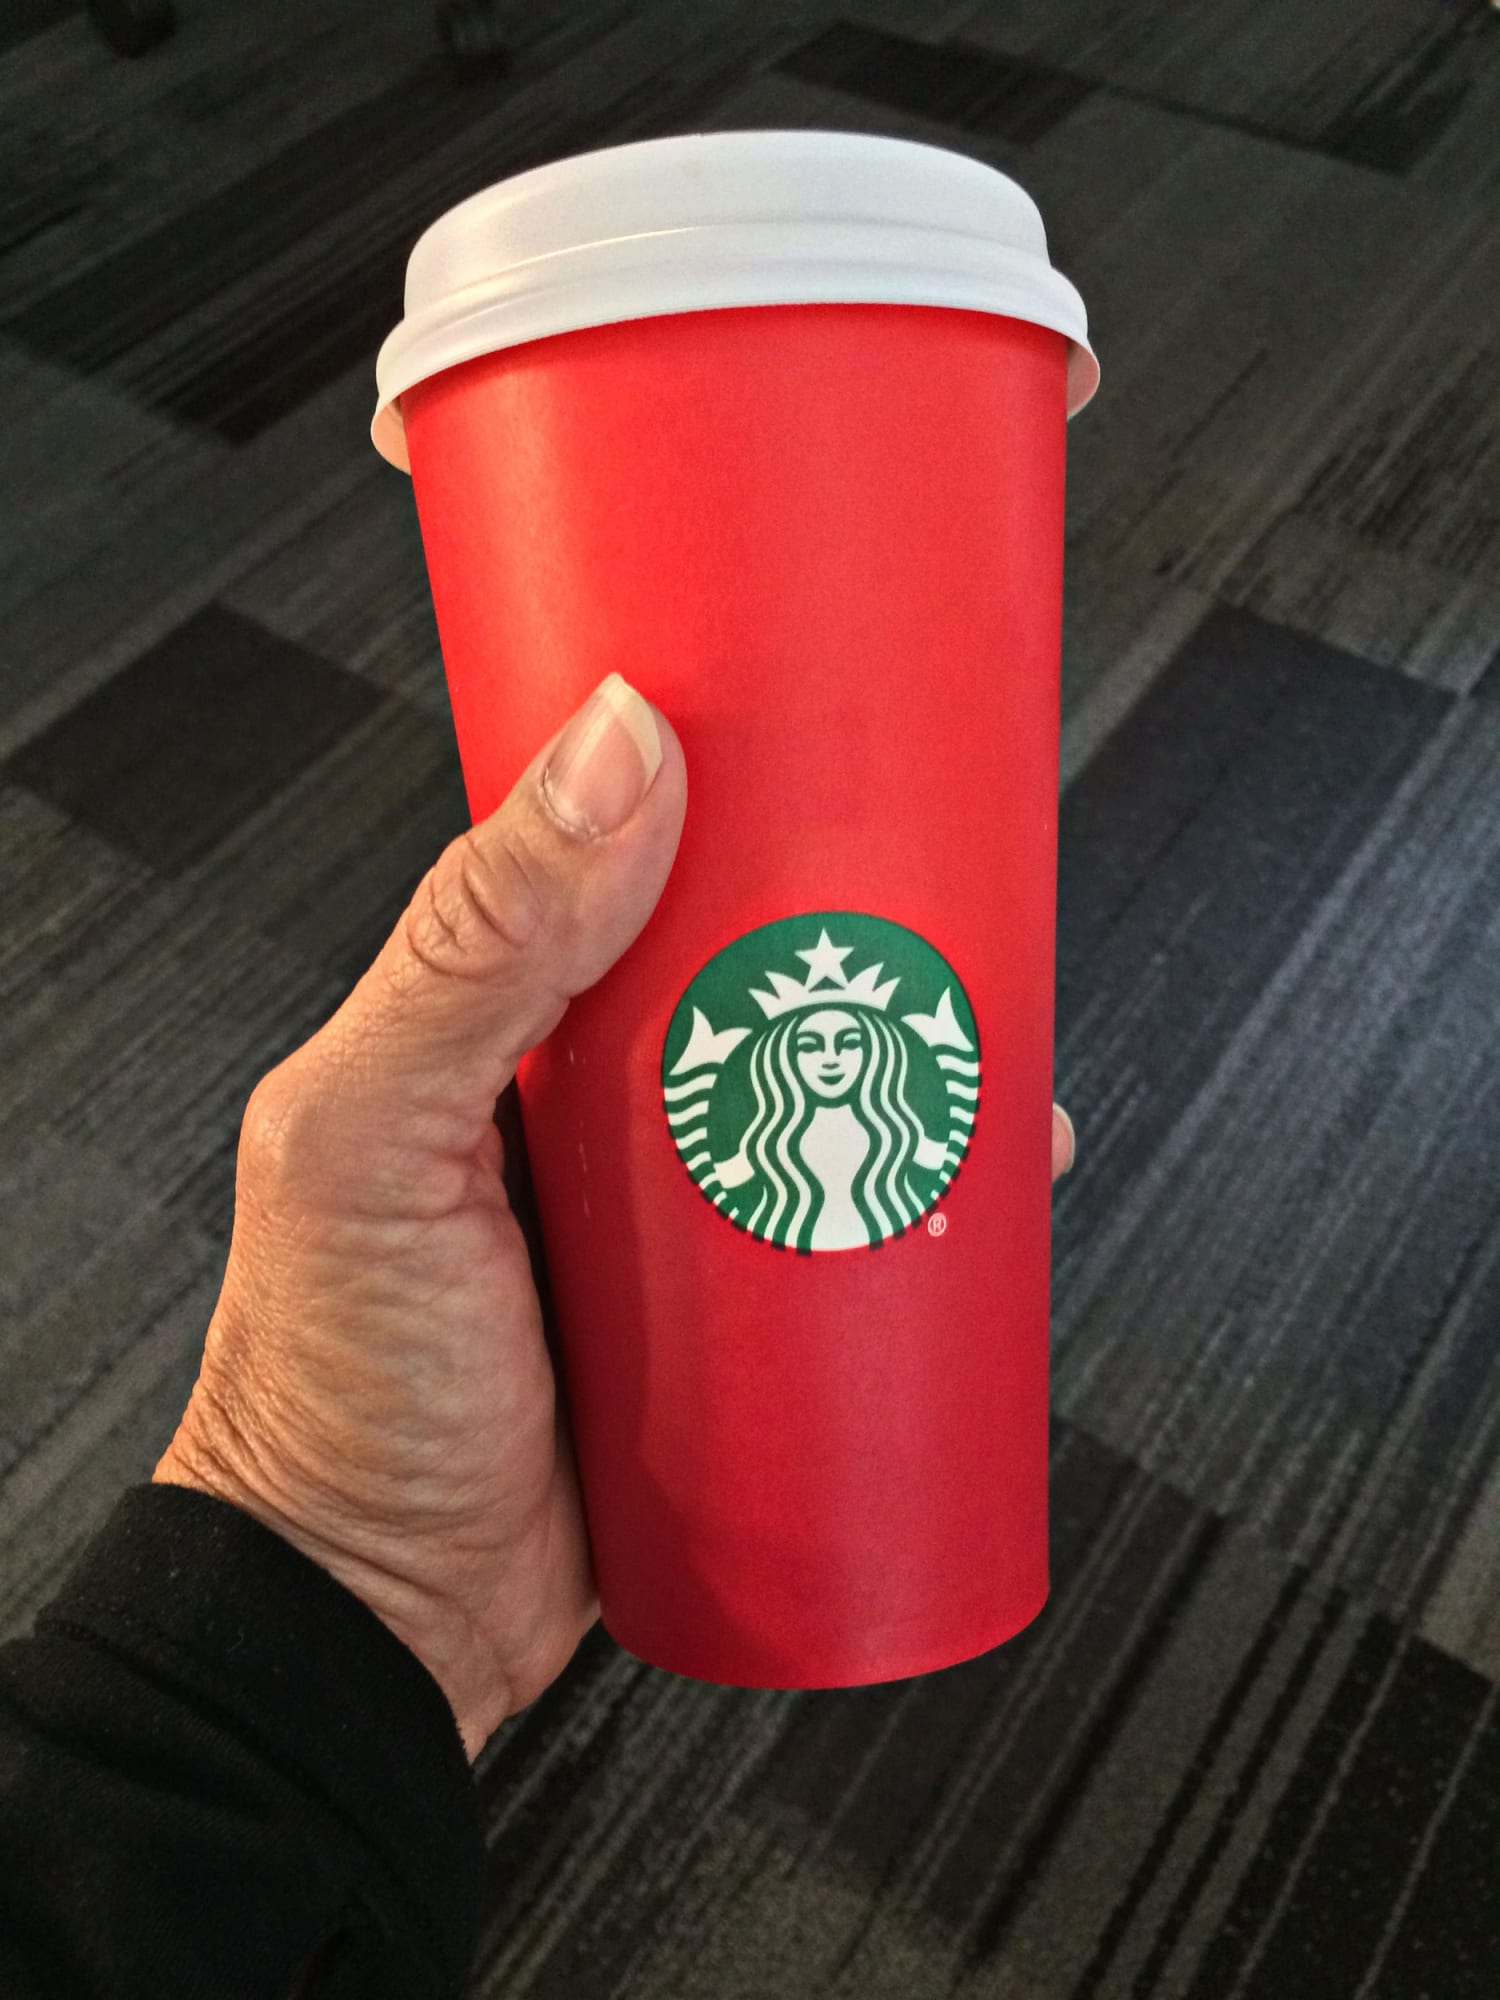 tryk Hysterisk morsom mikrocomputer Is Starbucks Waging 'War on Christmas'? Red Cup Stirs Controversy